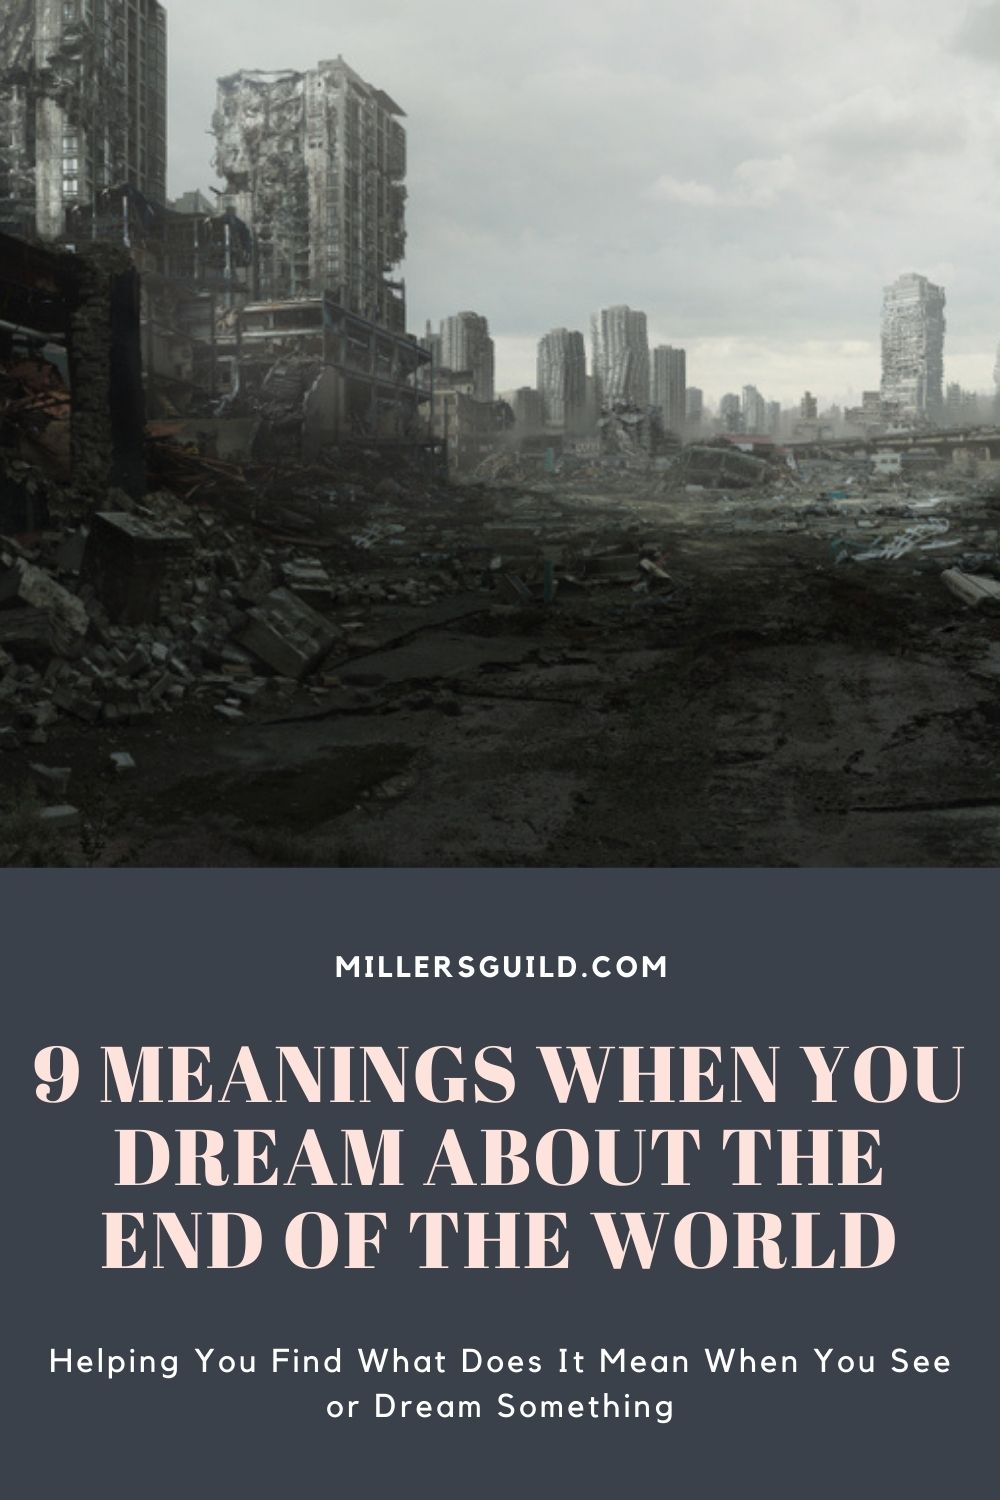 9 Meanings When You Dream About the End of the World 2